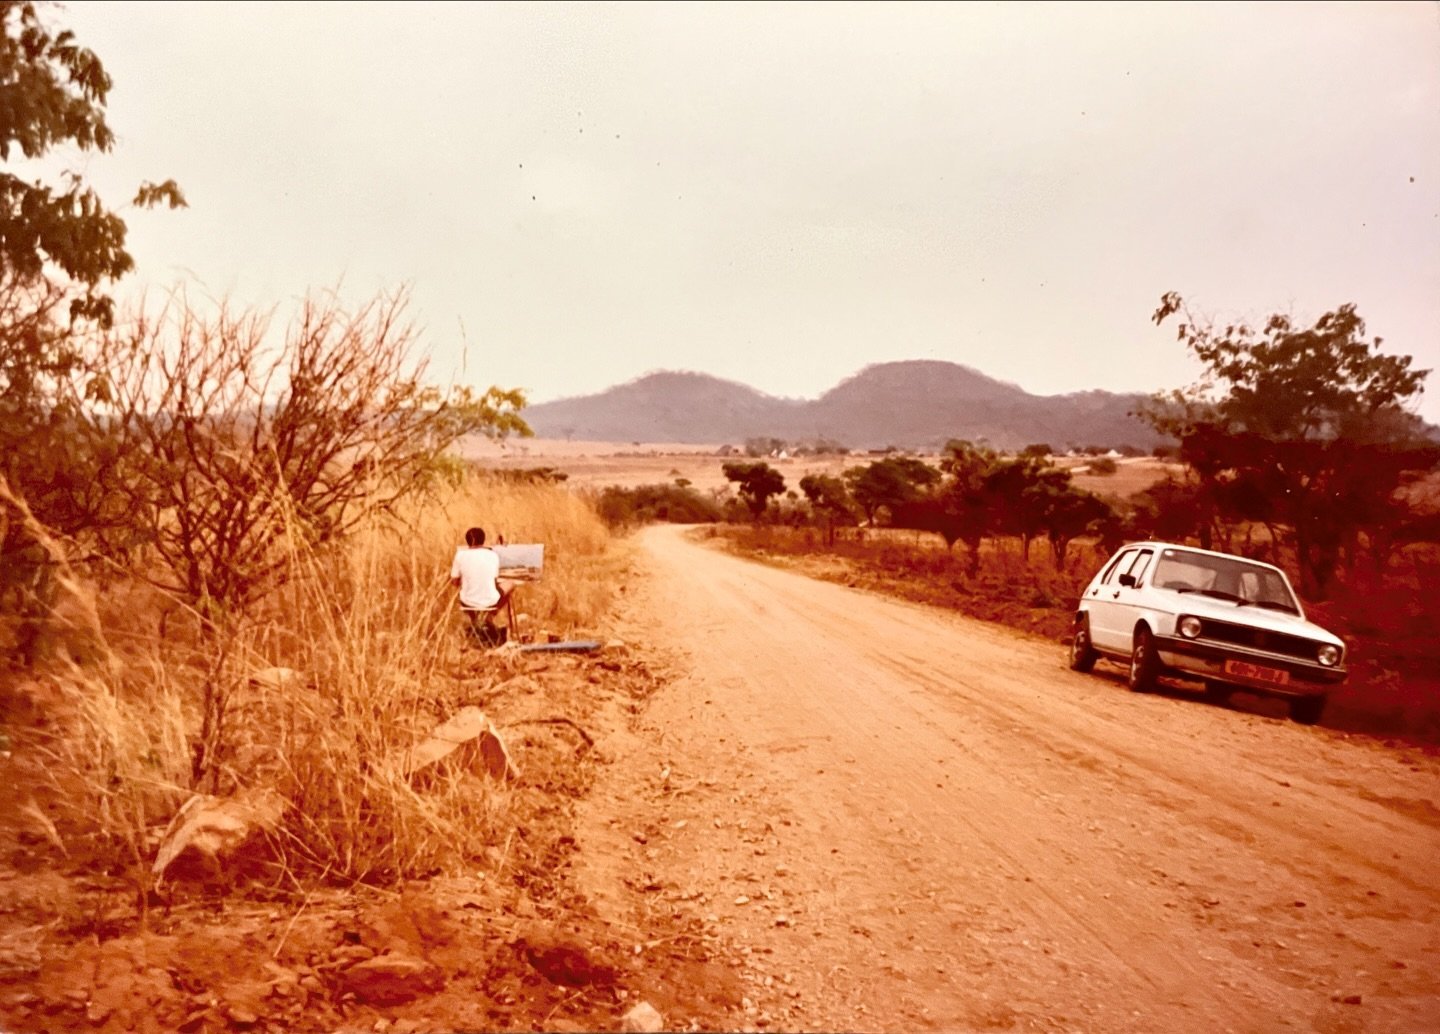 Back in the day!  Guessing around &lsquo;81, Raffingora Plein Aire moment.  On the road somewhere near the Vaughan Davis&rsquo; farm. #pleinairpainting #craigbone #craigboneartist #landscape #olddays